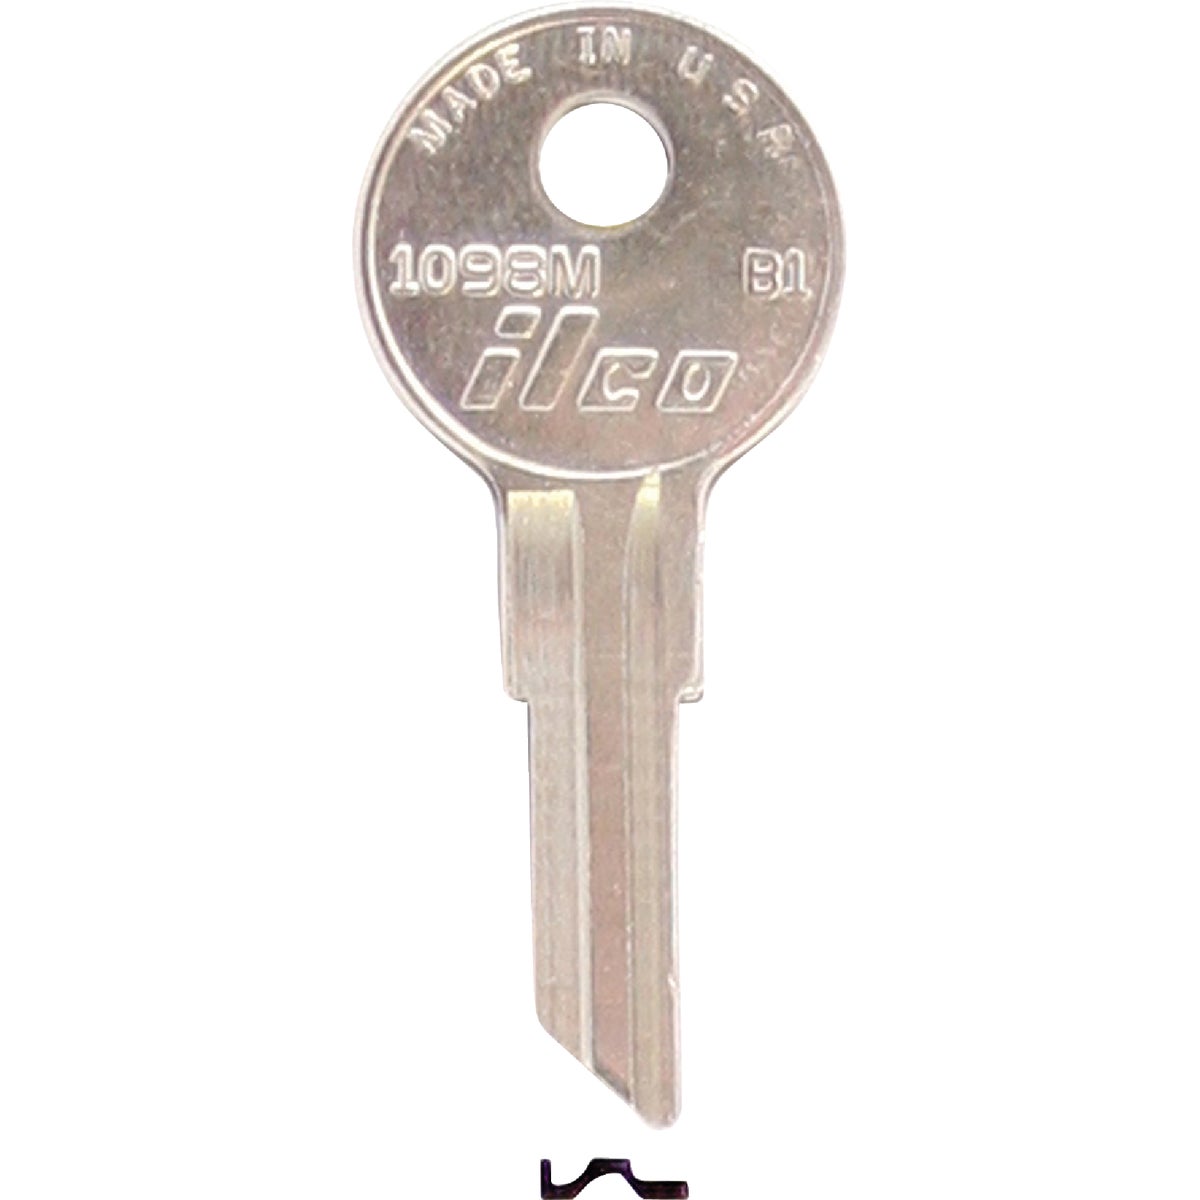 Item 203960, Nickel-plated key blank. When you order one, you will receive 10 keys.